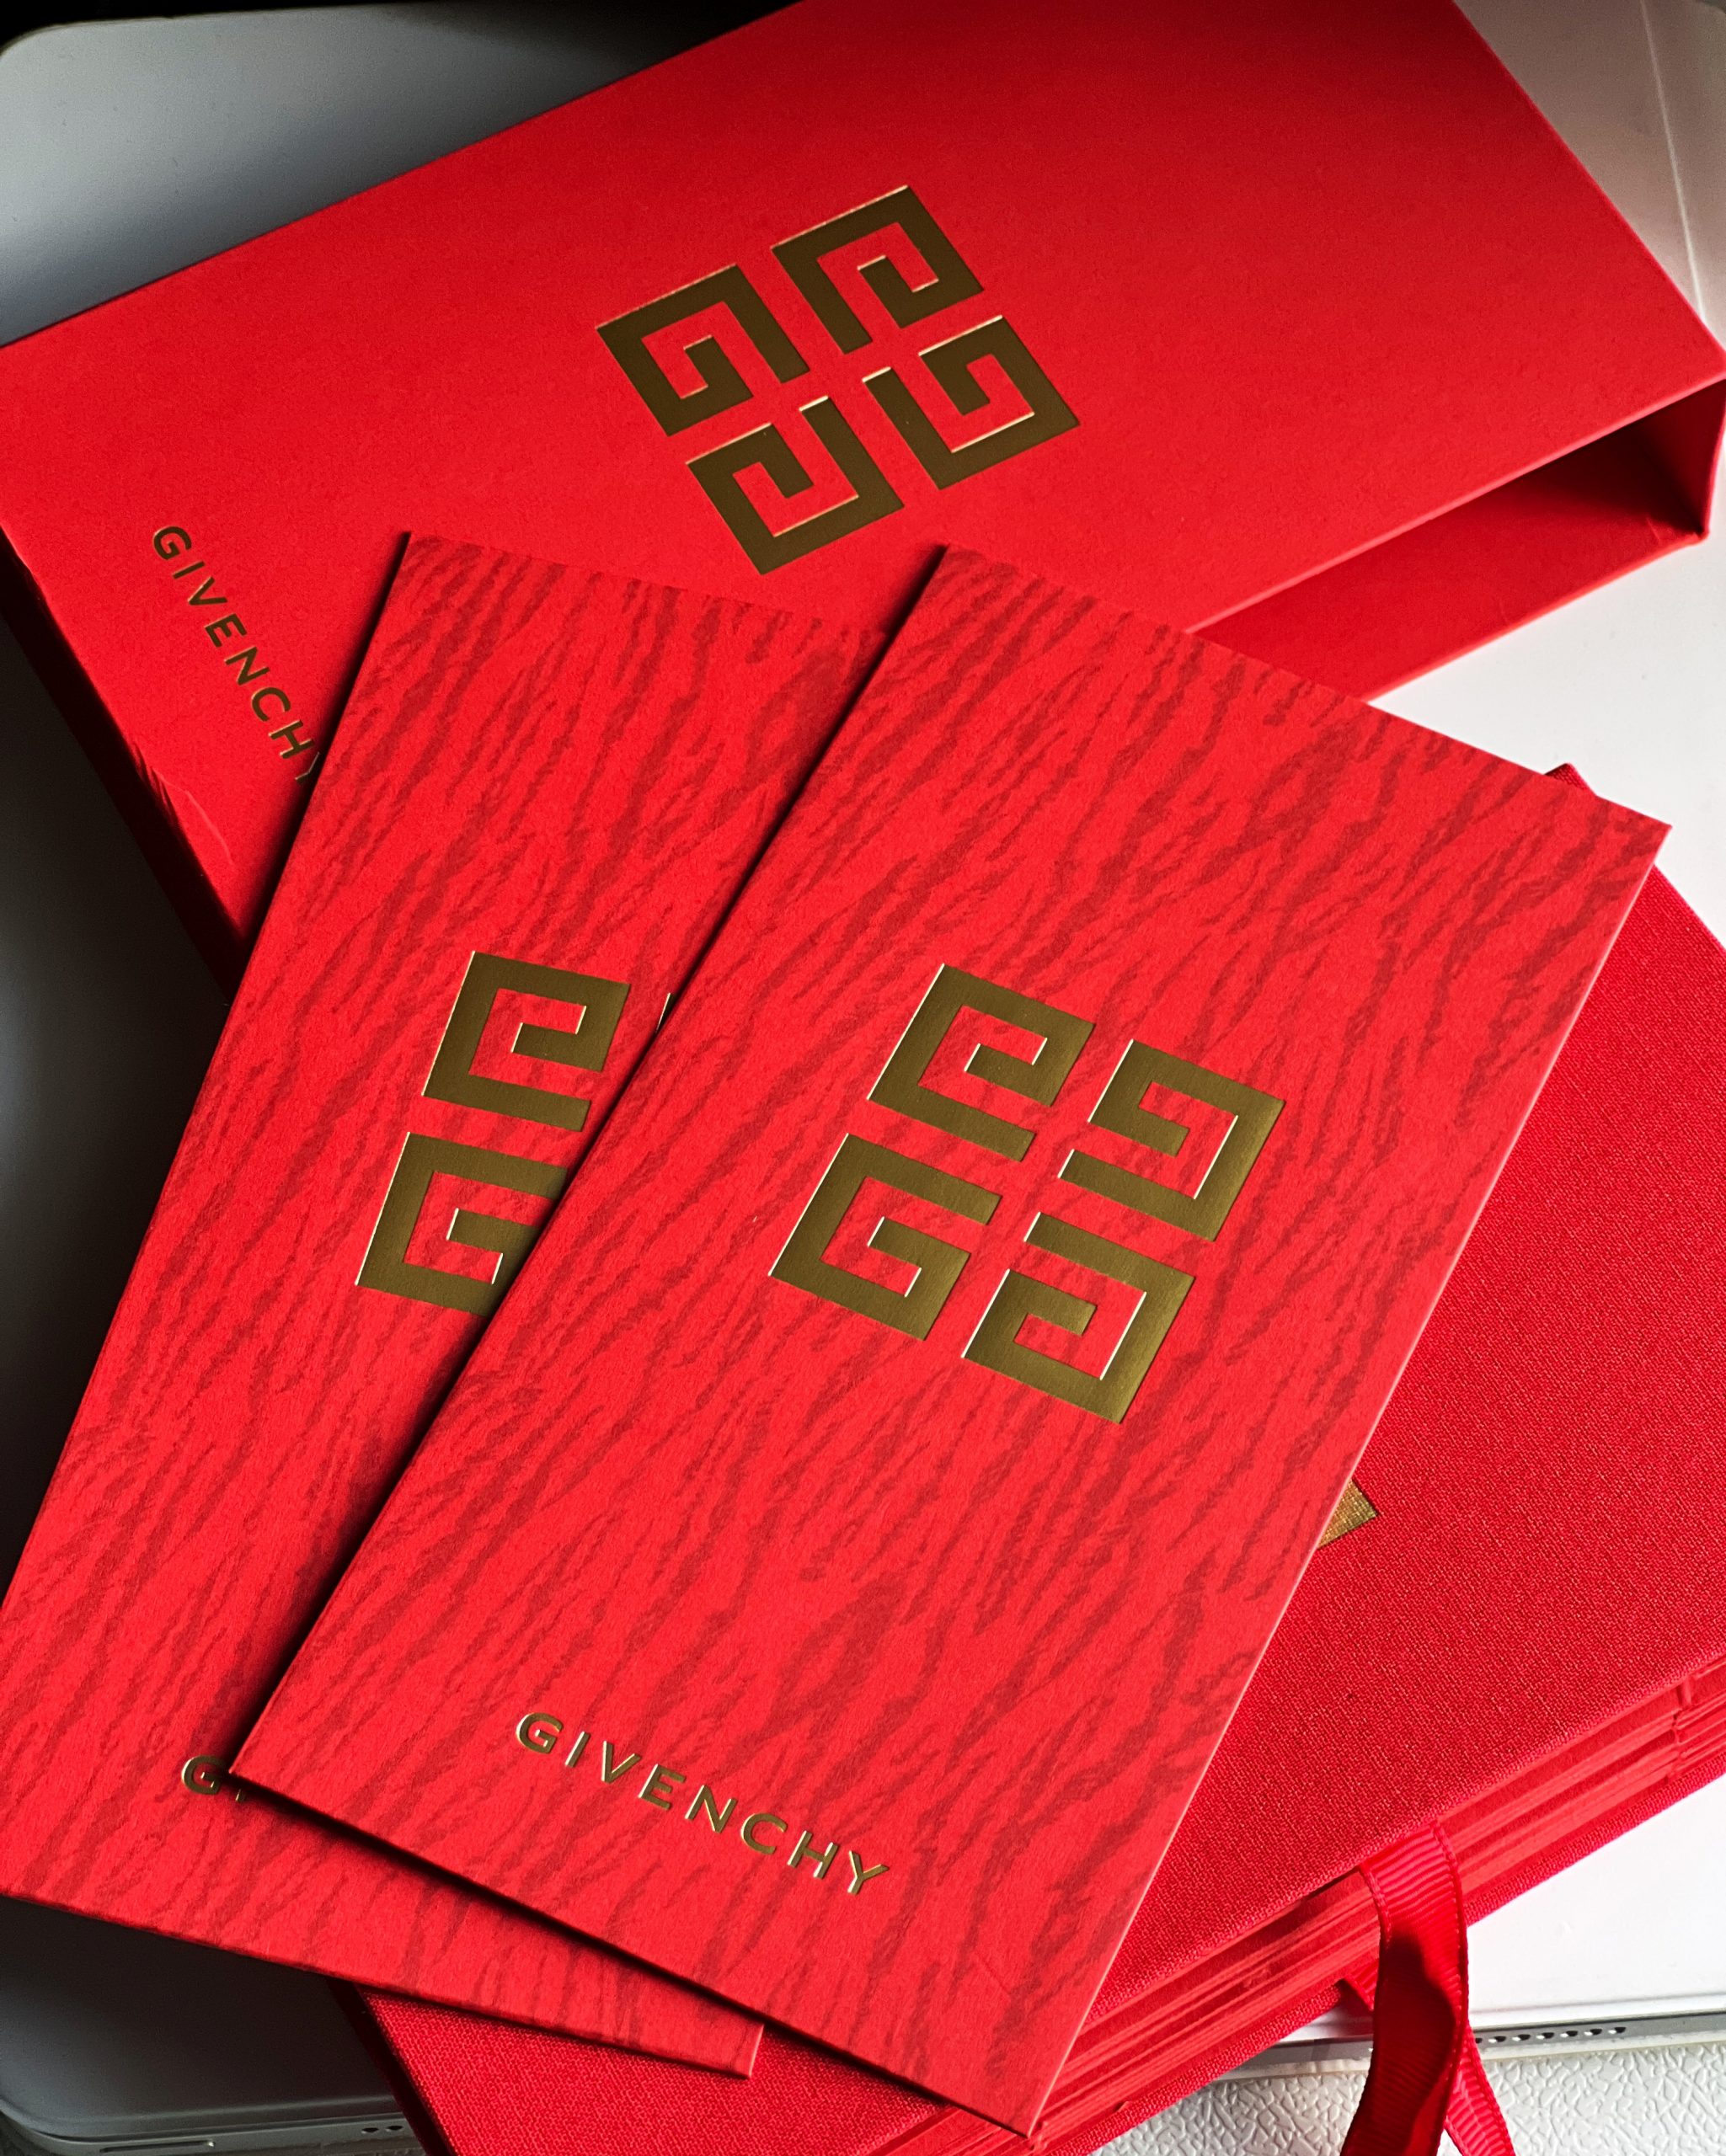 7 unique red packet designs that stand out from the rest